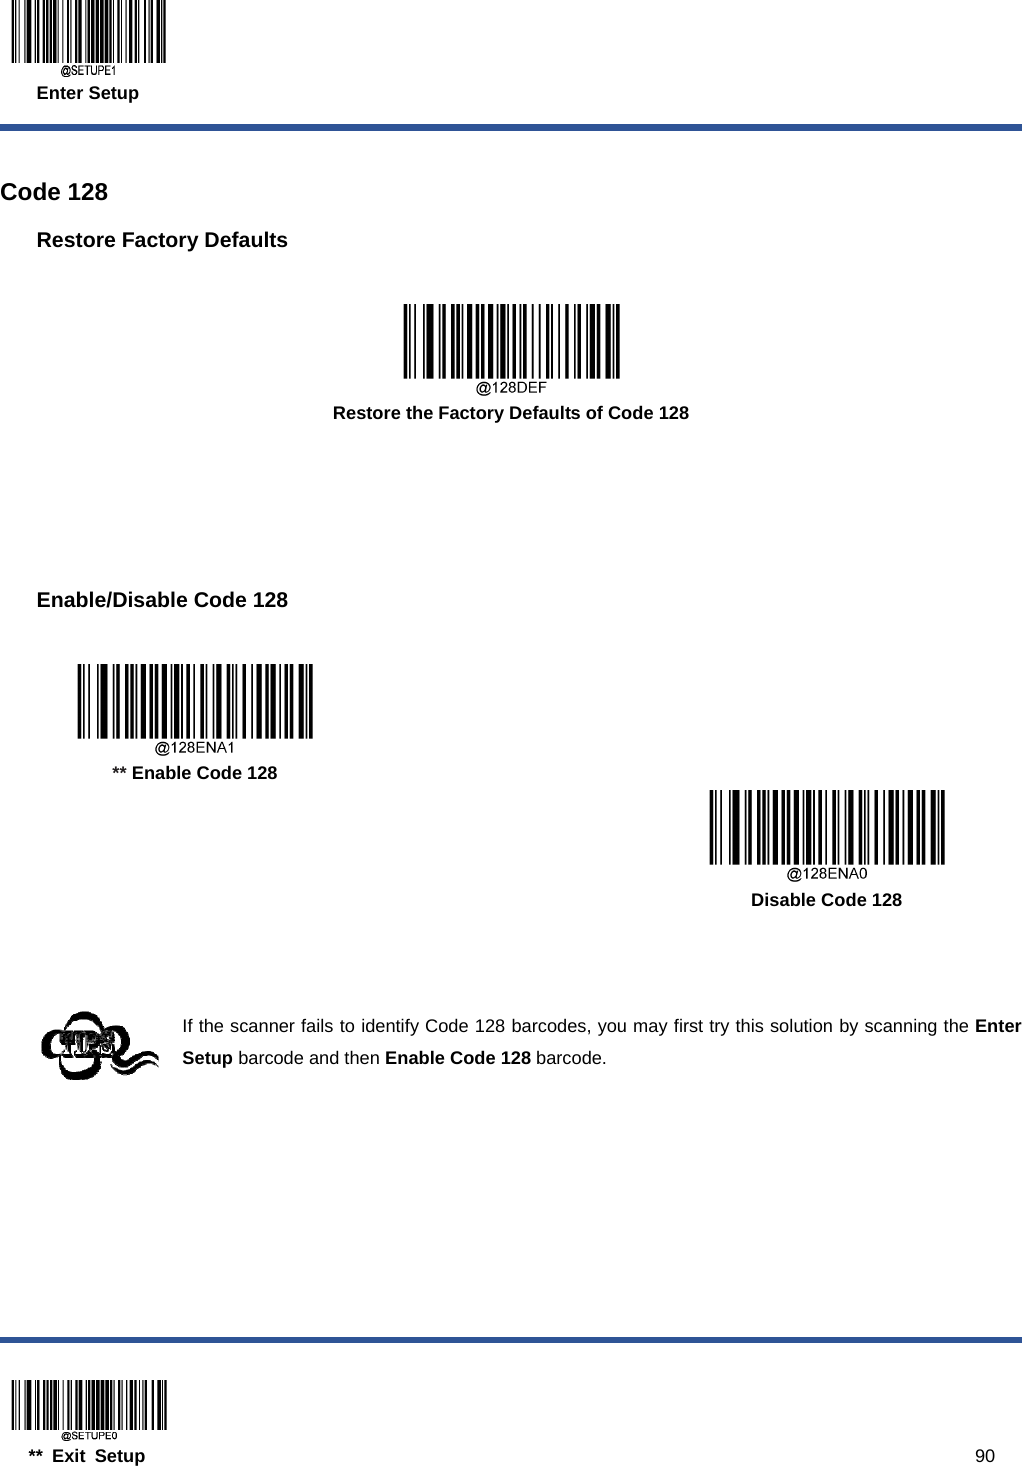  Enter Setup  ** Exit Setup                                                                                           90  Code 128 Restore Factory Defaults   Restore the Factory Defaults of Code 128    Enable/Disable Code 128     ** Enable Code 128      Disable Code 128    If the scanner fails to identify Code 128 barcodes, you may first try this solution by scanning the Enter Setup barcode and then Enable Code 128 barcode. 